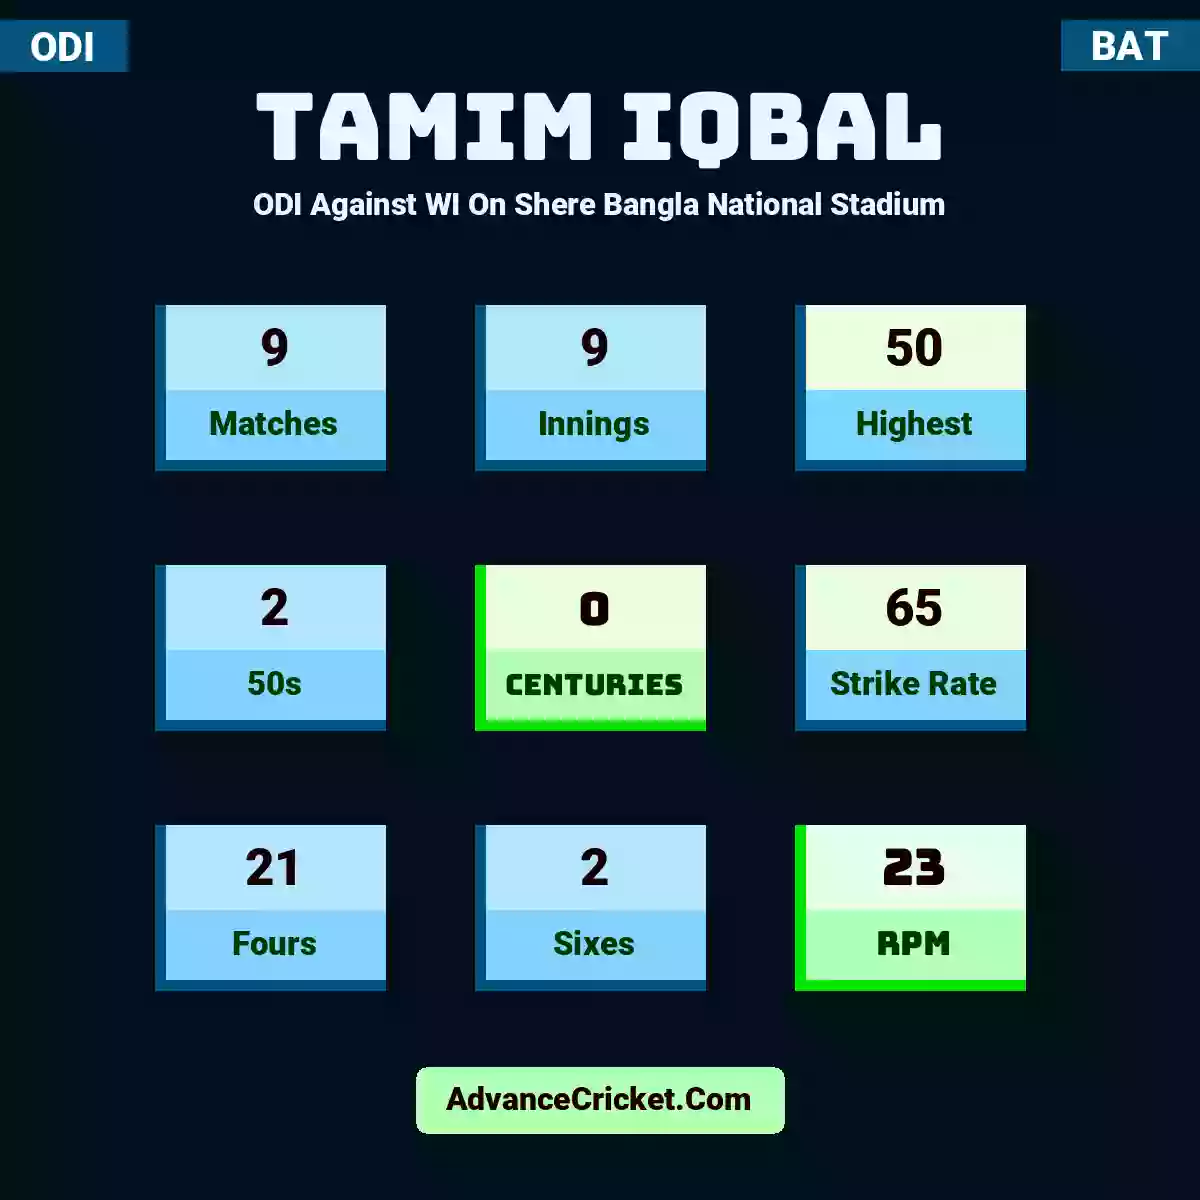 Tamim Iqbal ODI  Against WI On Shere Bangla National Stadium, Tamim Iqbal played 9 matches, scored 50 runs as highest, 2 half-centuries, and 0 centuries, with a strike rate of 65. T.Iqbal hit 21 fours and 2 sixes, with an RPM of 23.